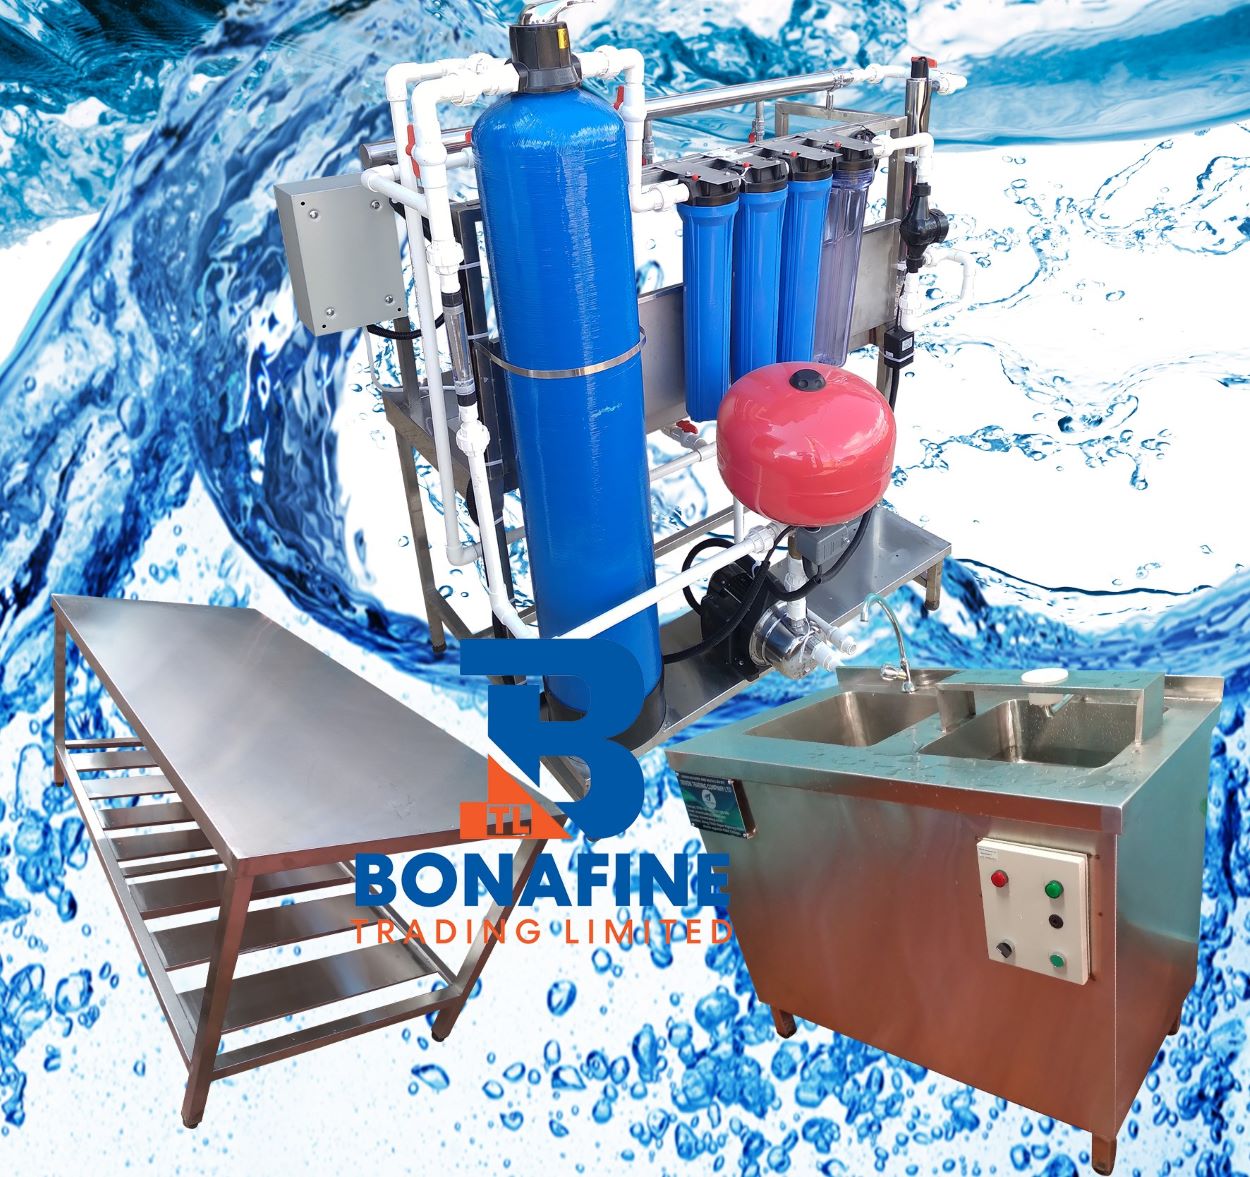 Bonafine Trading is a Reliable Water, Dairy and Salad automation Solutions provider in Kenya. Bonafine trading limited is a highly diversified machine manufacturer and equipment fabrications. The company has earned its place in today’s competitive market through continuous engagement in manufacturing and superior service delivery. MISSION • To provide solution to day to day life • To enhance customer satisfaction by providing quality products for commercial and domestic machine solution at competitive